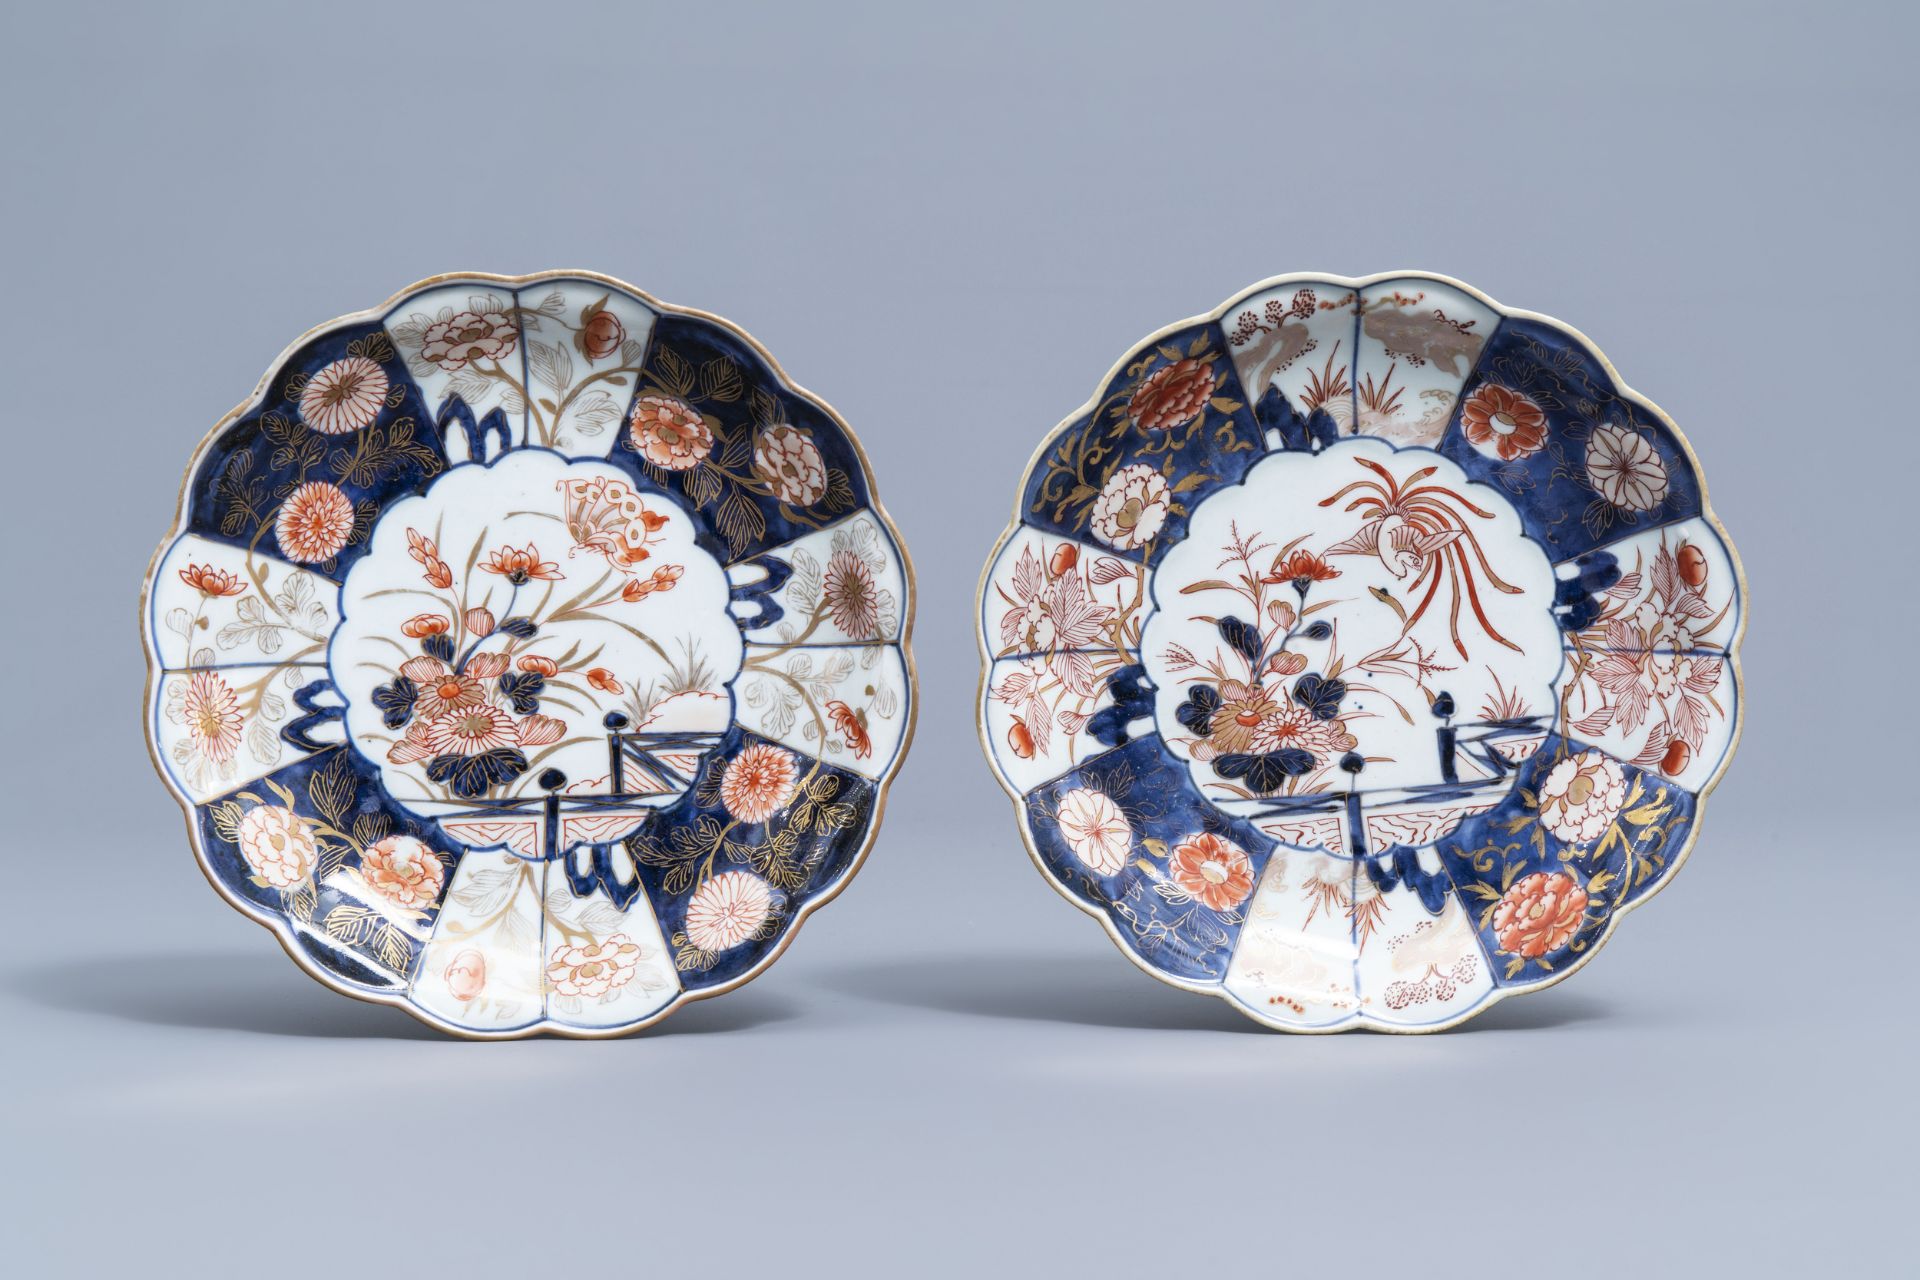 Seven Japanese Imari plates with scalloped rim and floral design, Edo, 18th C. - Image 4 of 7